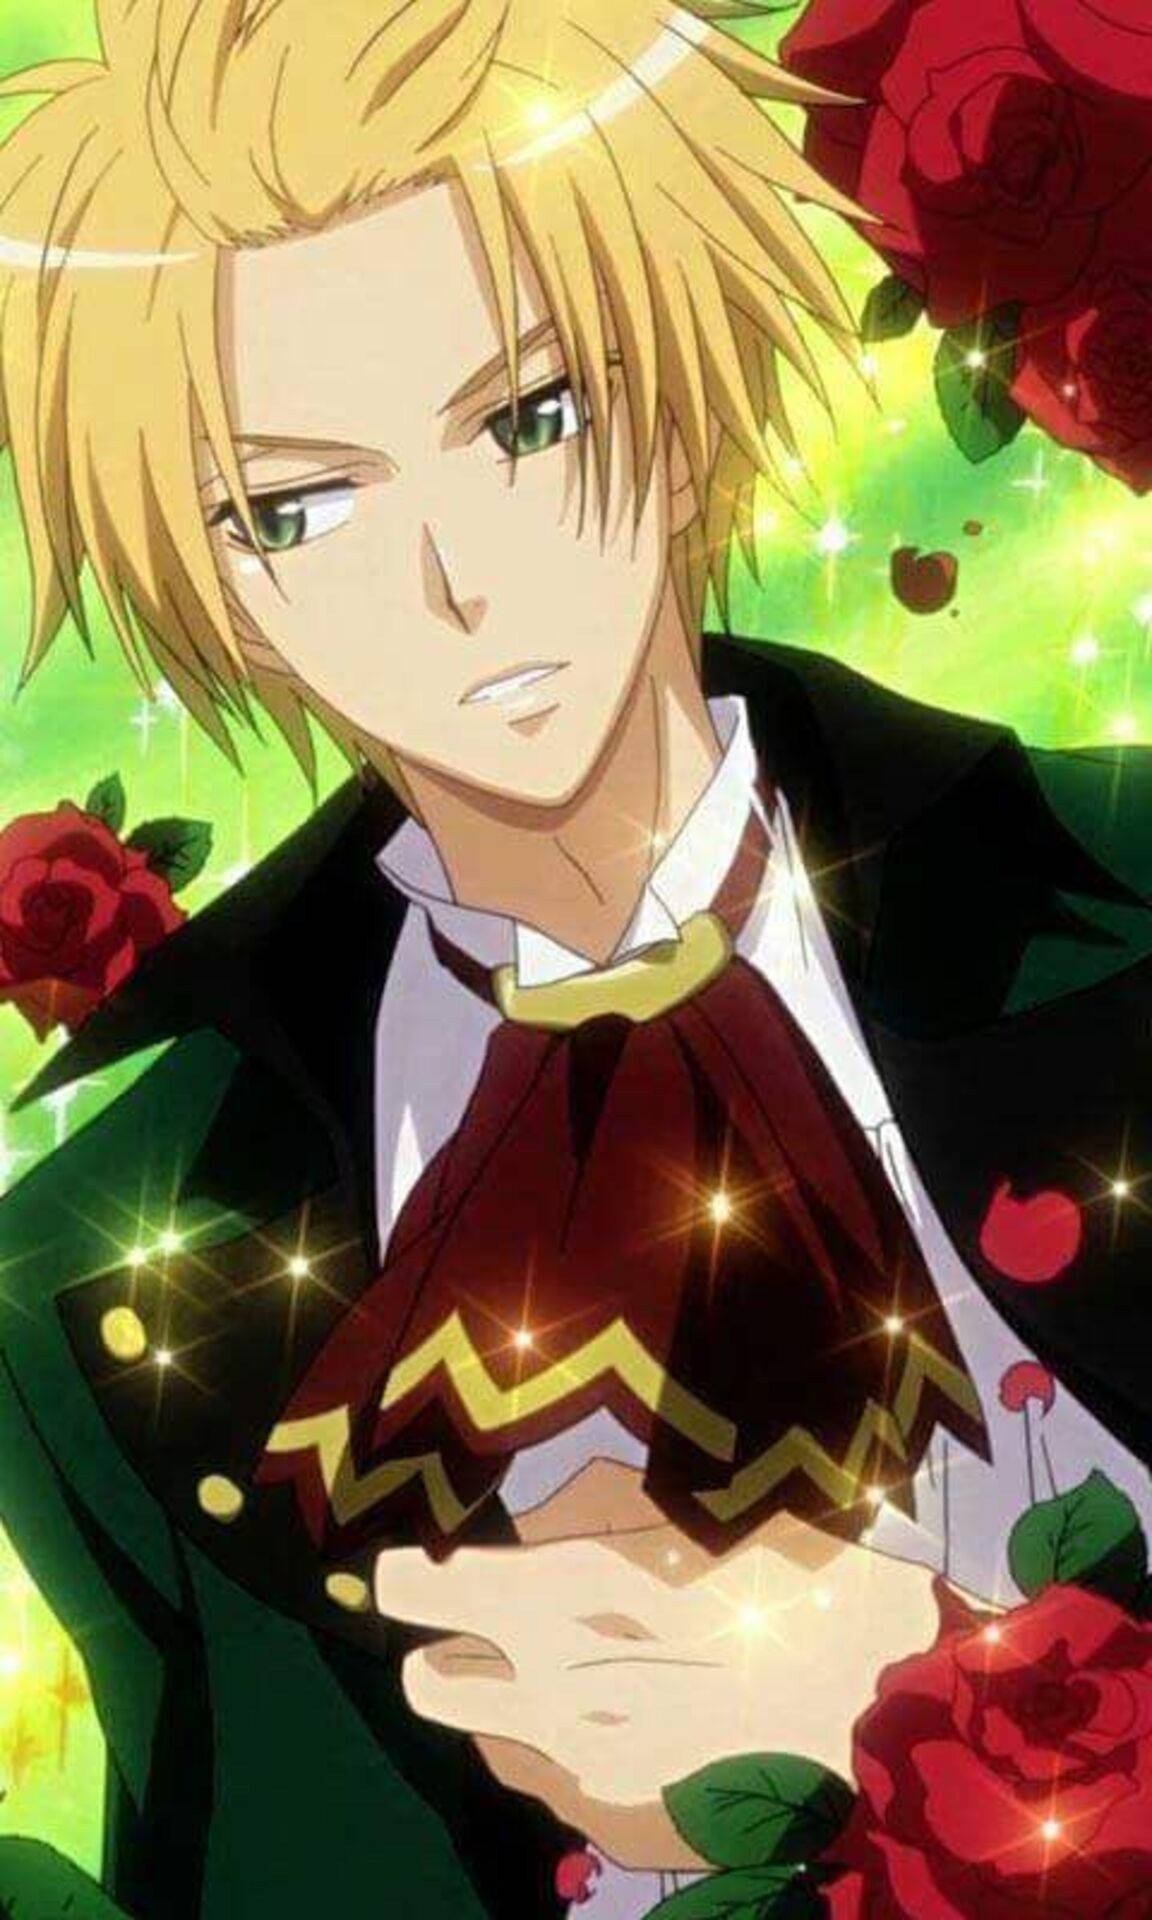 Maid sama-the anime Fan Club | Fansite with photos, videos, and more